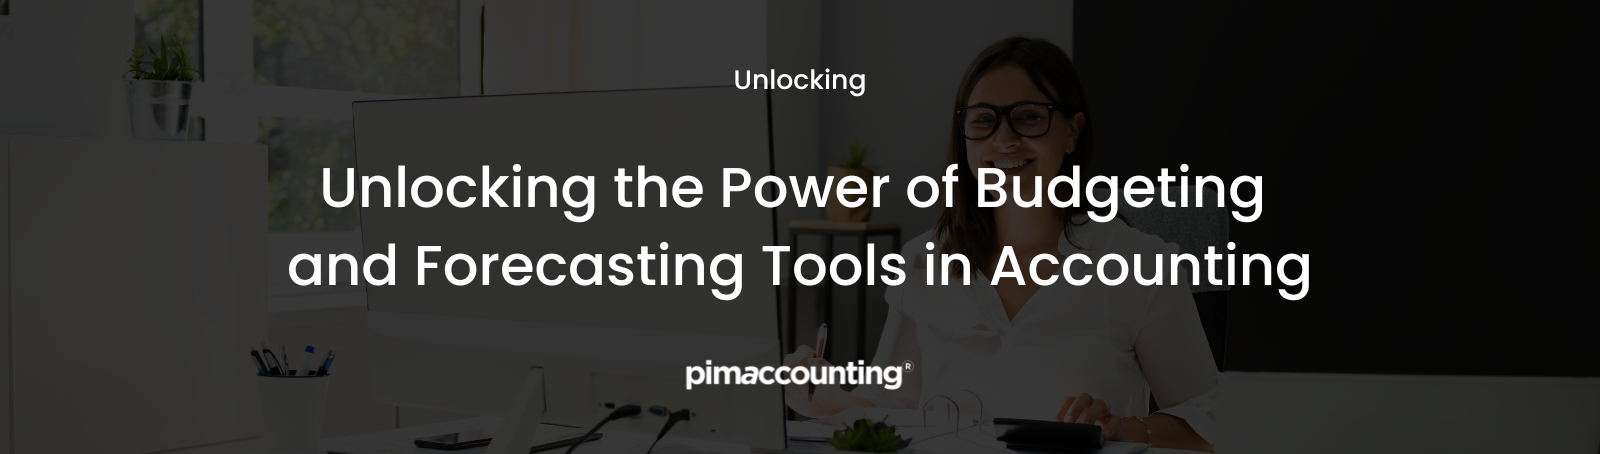 Powerful Budgeting & Forecasting Tools: Unlocking Accounting Potential